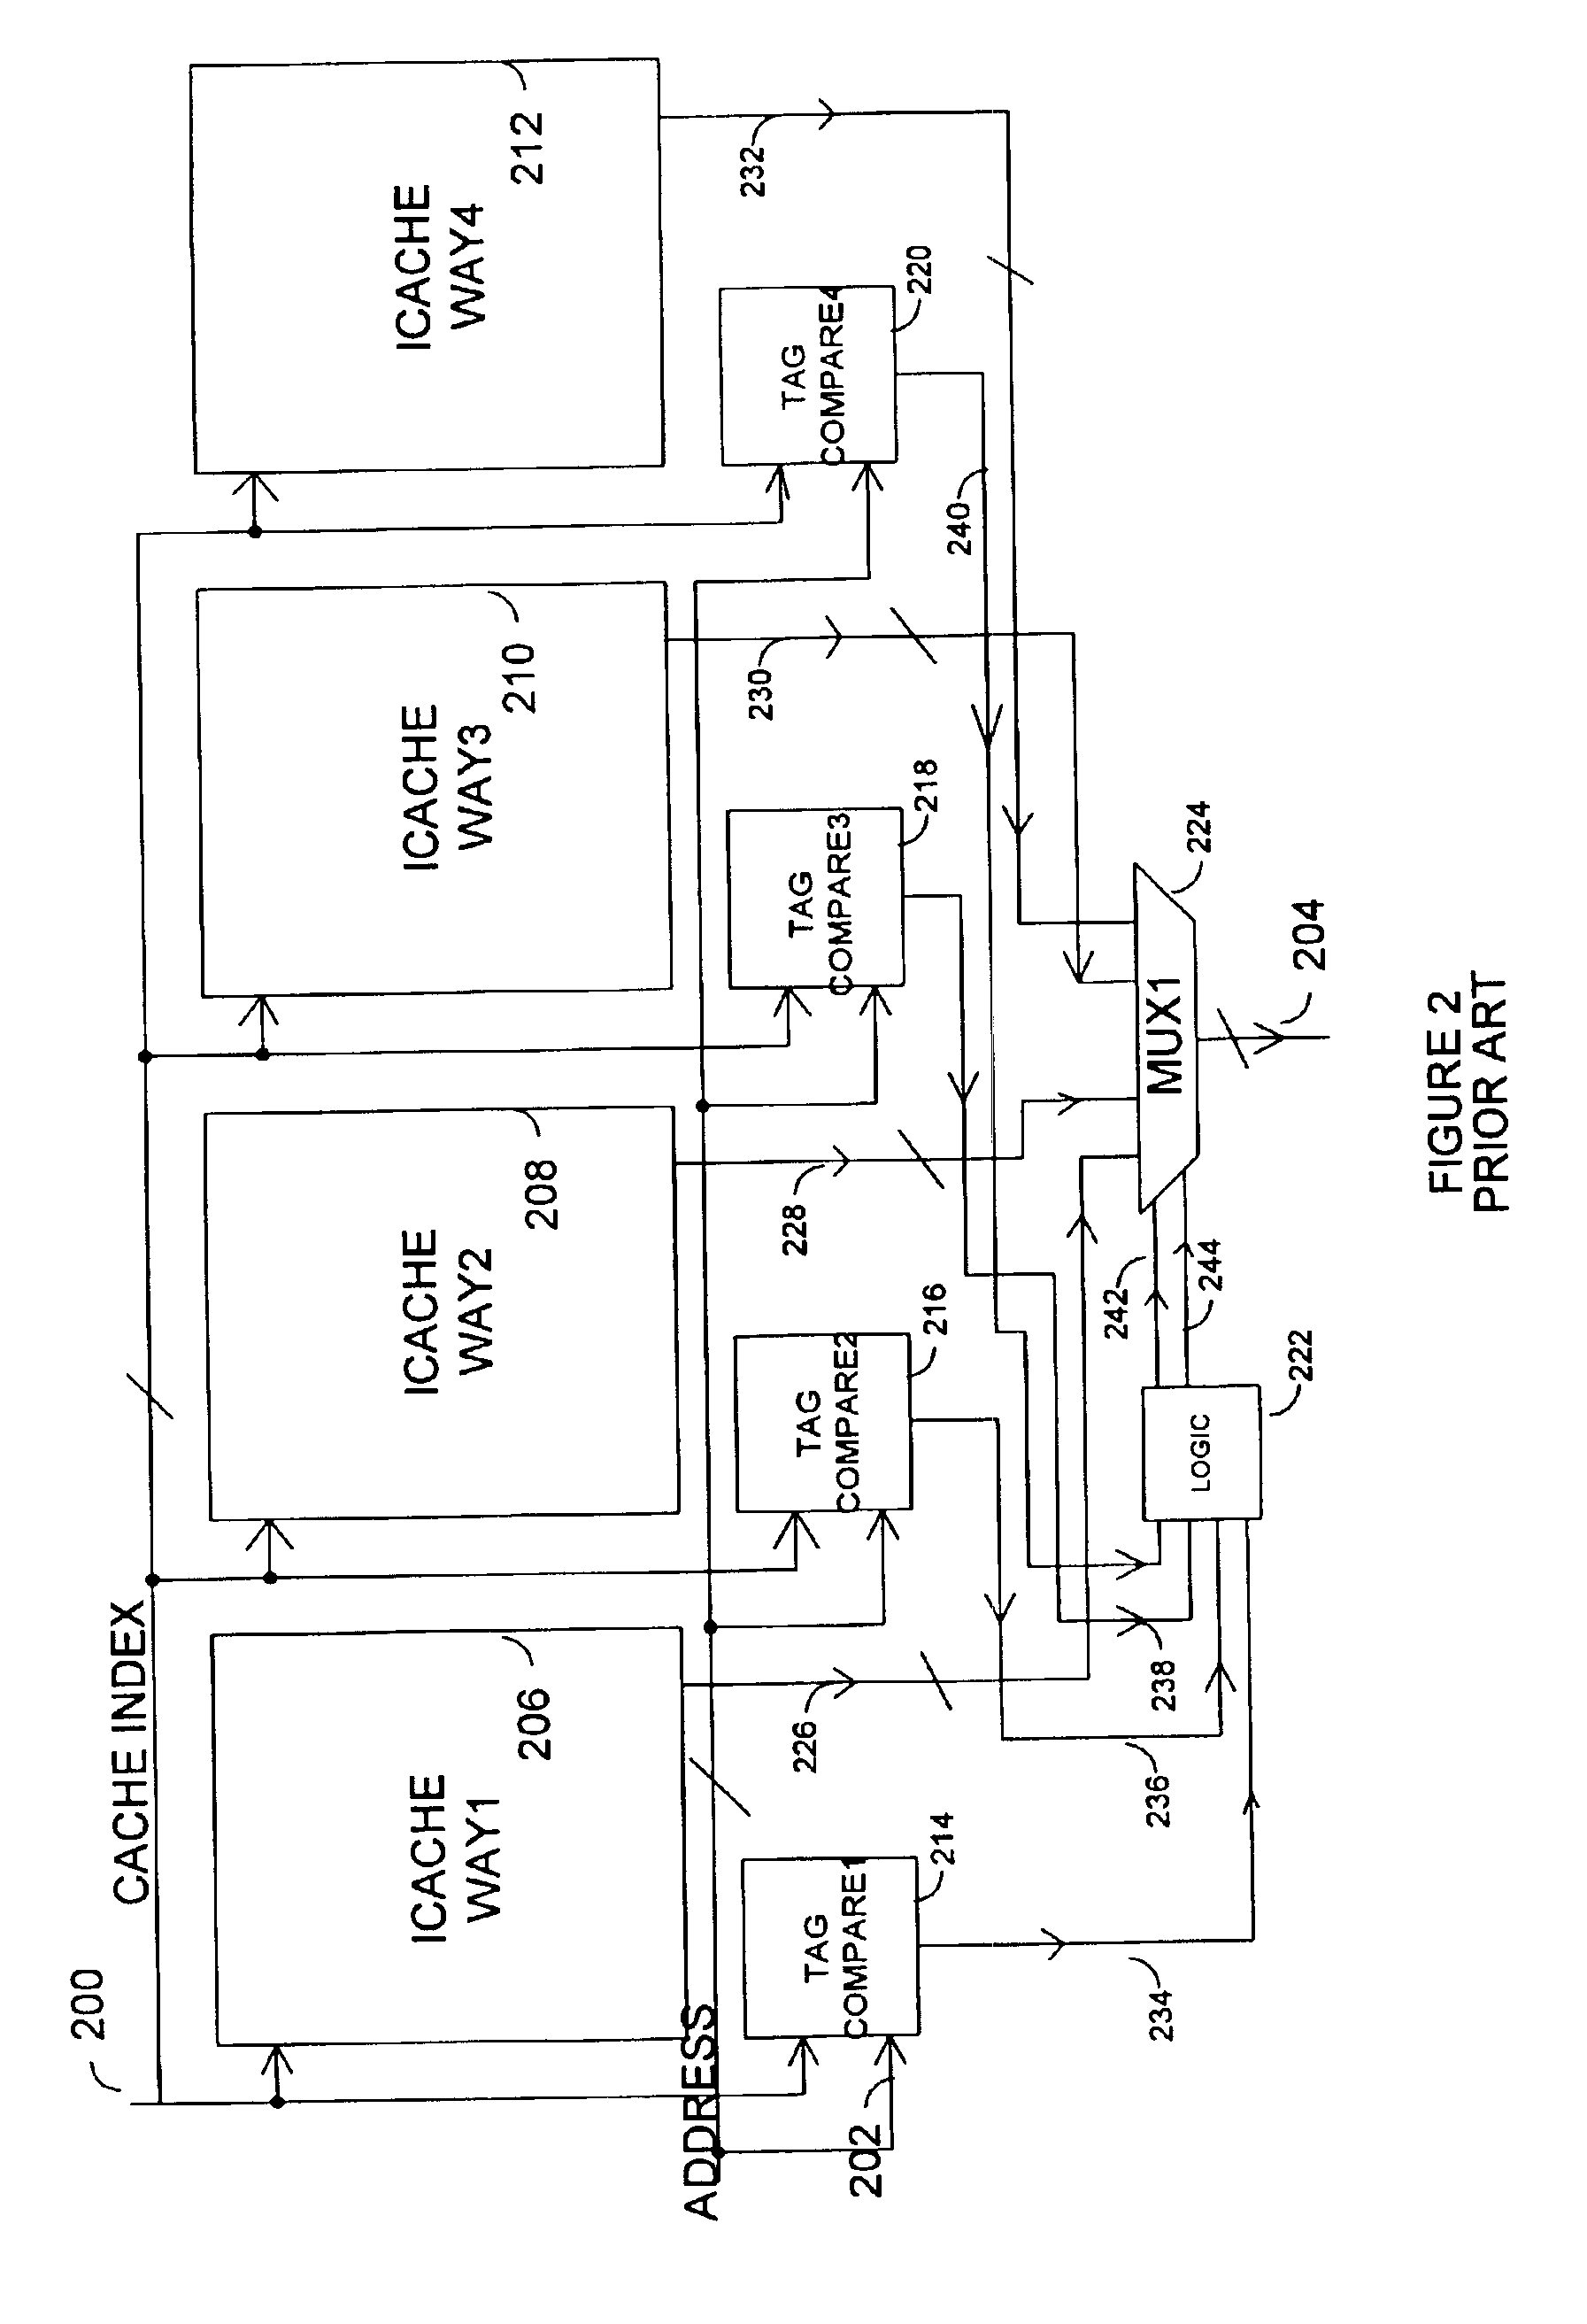 Method and apparatus for saving microprocessor power when sequentially accessing the microprocessor's instruction cache